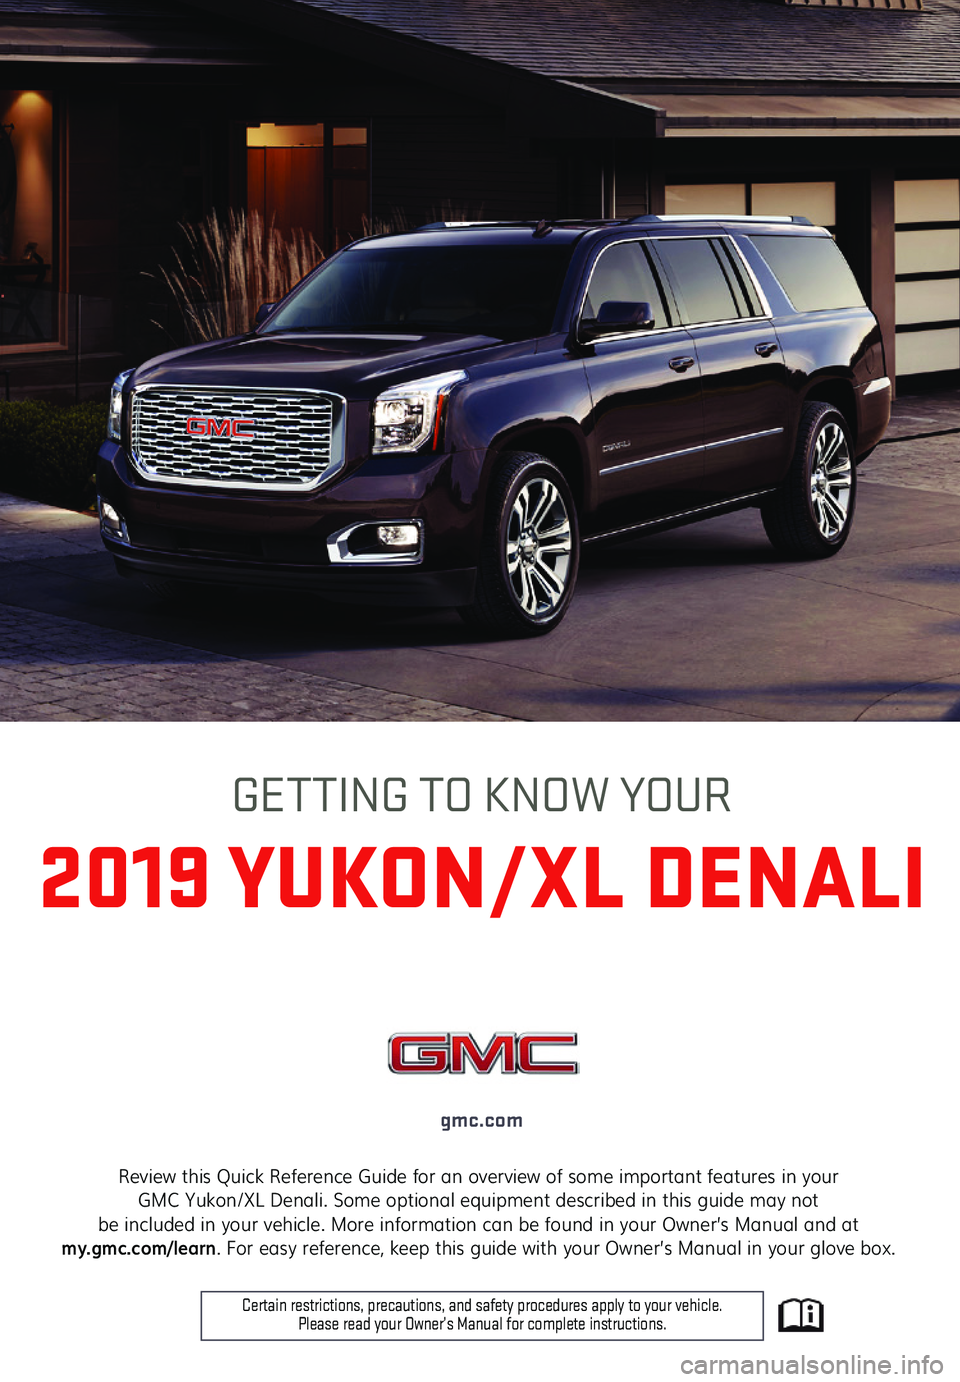 GMC YUKON XL 2019  Get To Know Guide 1
Review this Quick Reference Guide for an overview of some important features in your  GMC Yukon/XL Denali. Some optional equipment described in this guide may not  be included in your vehicle. More 